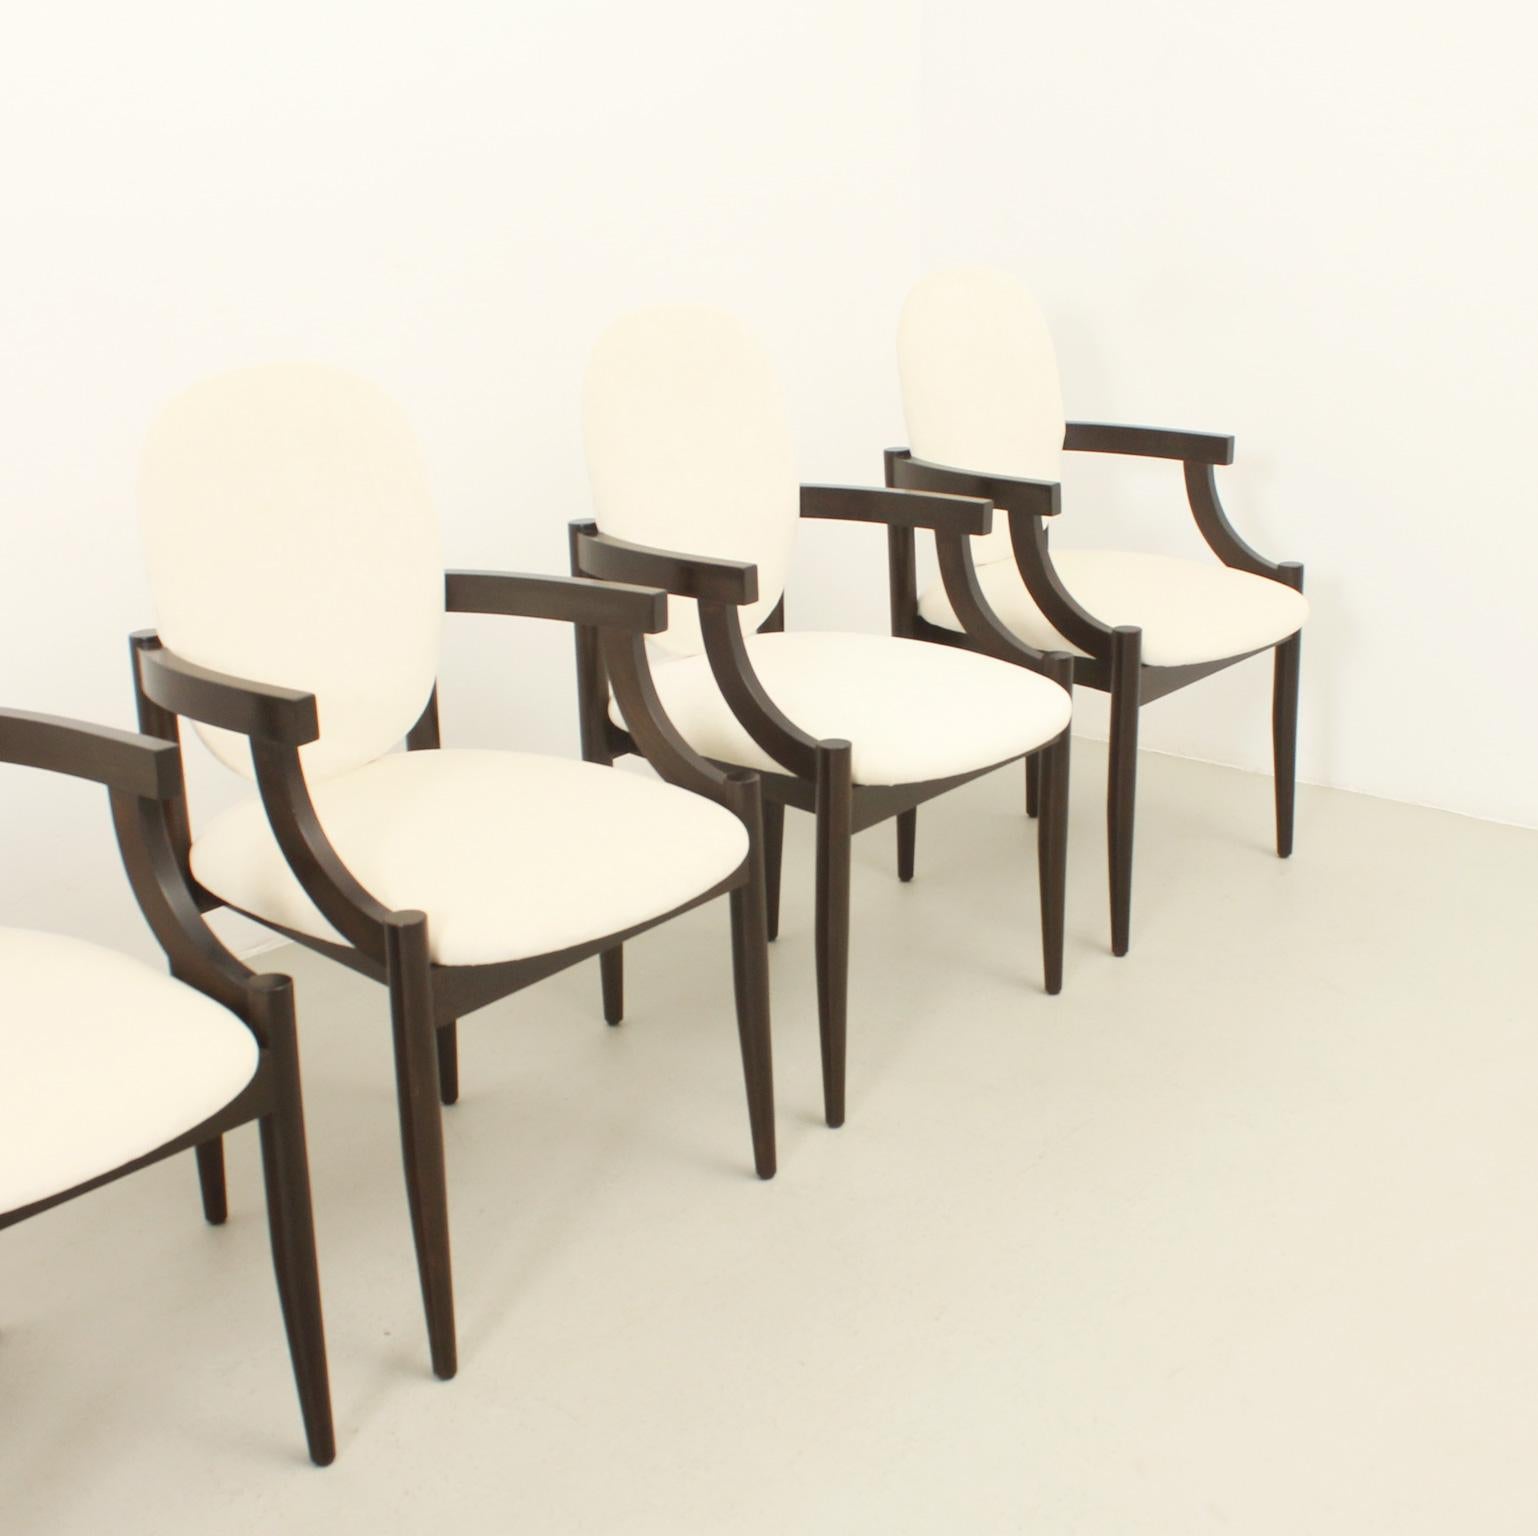 Mid-20th Century Six Reno Chairs by Spanish Architects Correa & Milá, 1961 For Sale